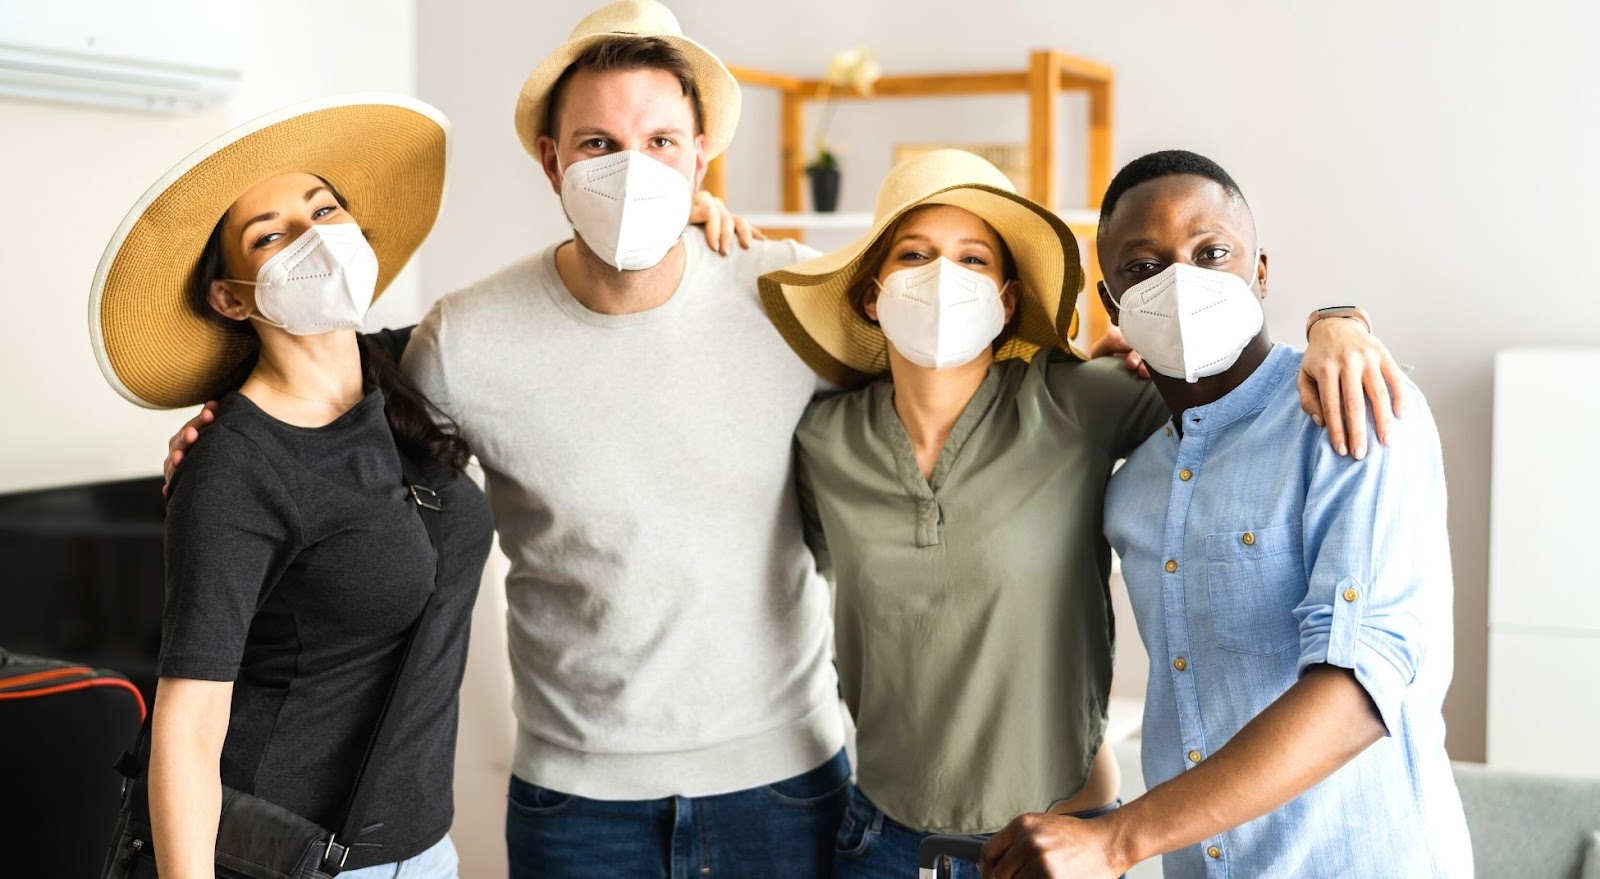 Group of friends wearing masks preparing to travel